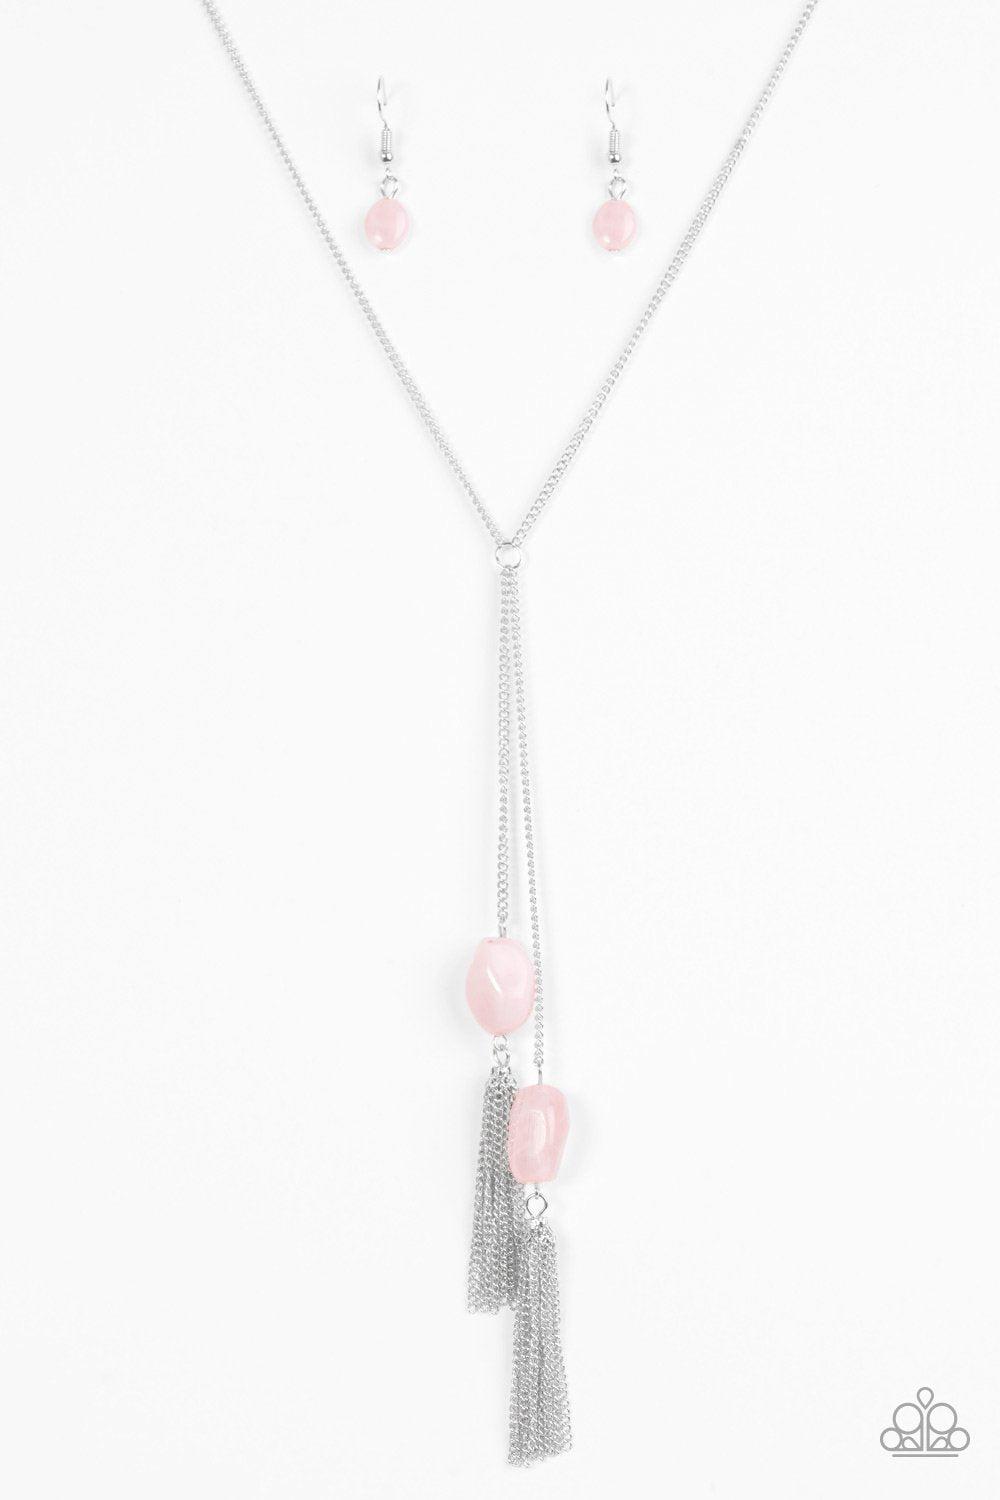 Glow Your Roll Long Pink Moonstone Tassel Necklace - Paparazzi Accessories-CarasShop.com - $5 Jewelry by Cara Jewels